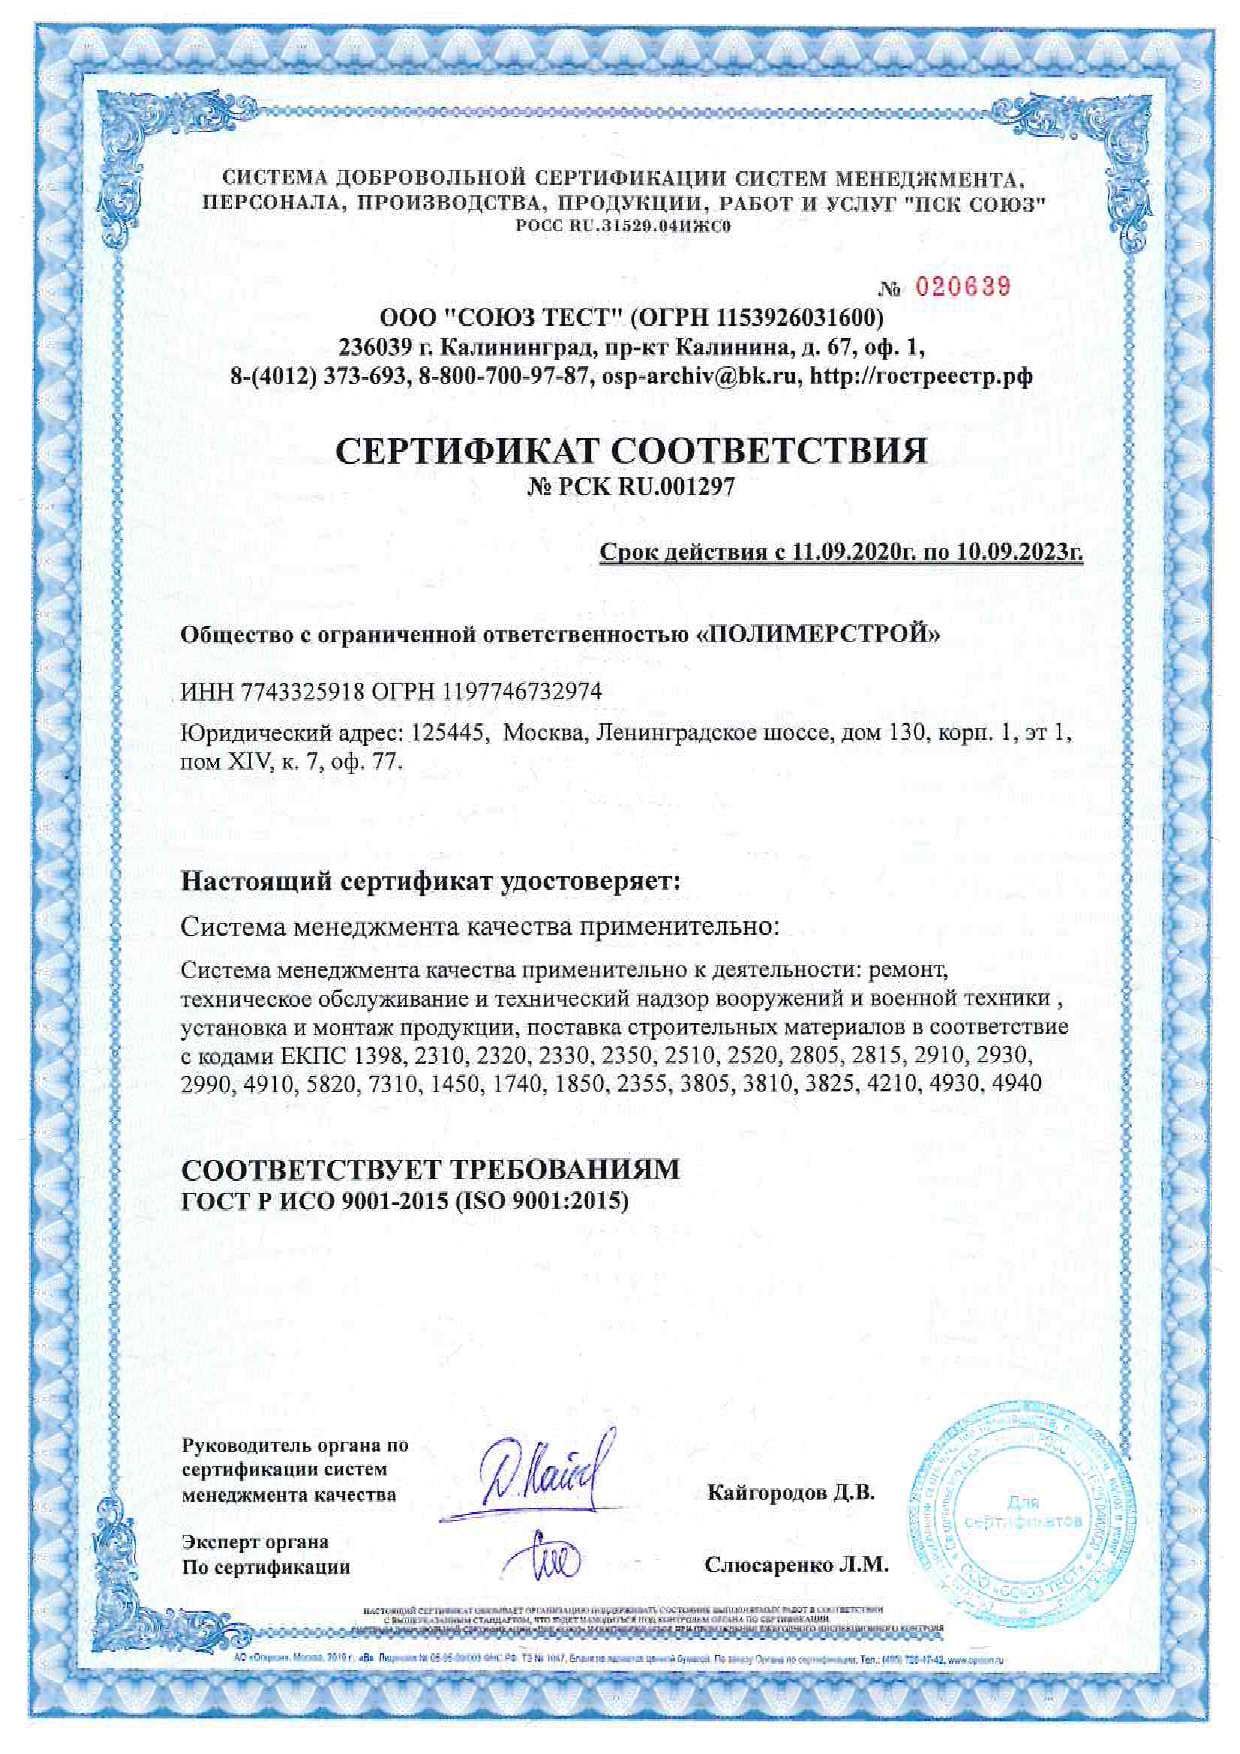      9001-2015 (ISO 9001:2015)